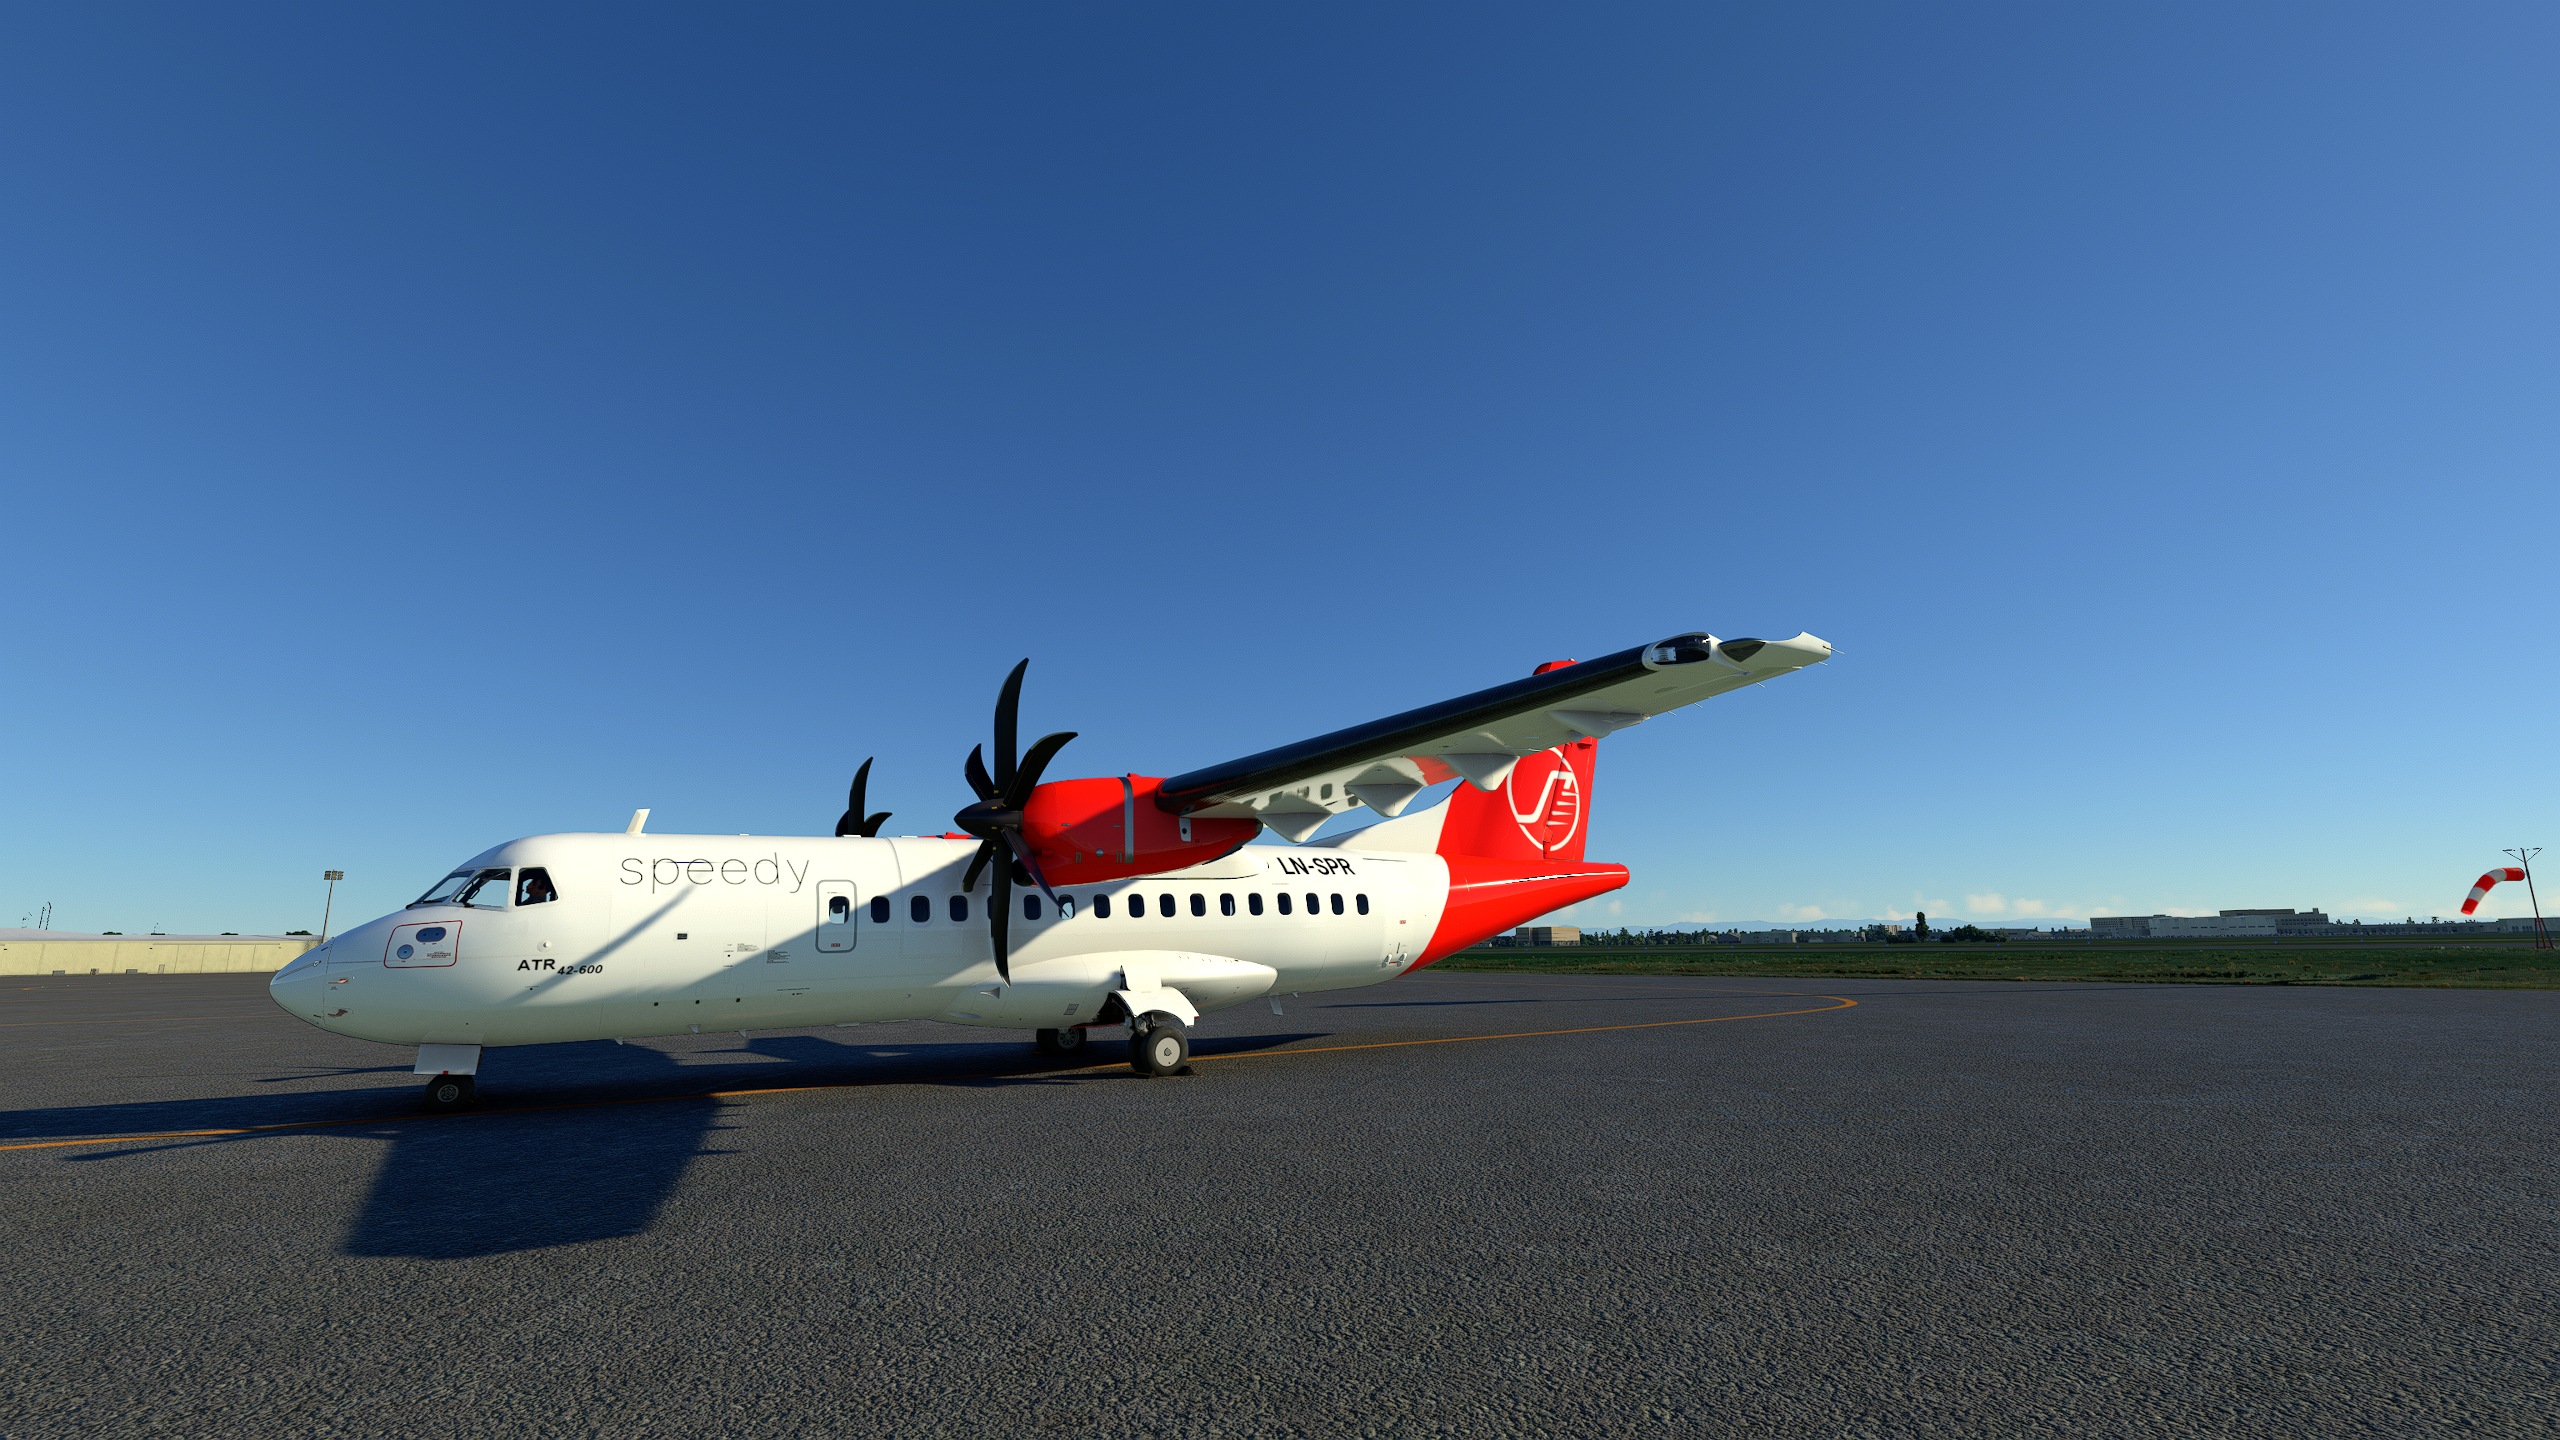  Speedy Airlines Welcomes First ATR 42-600 as Part of Expansion Plan for Essential Air Services to Northern Norway